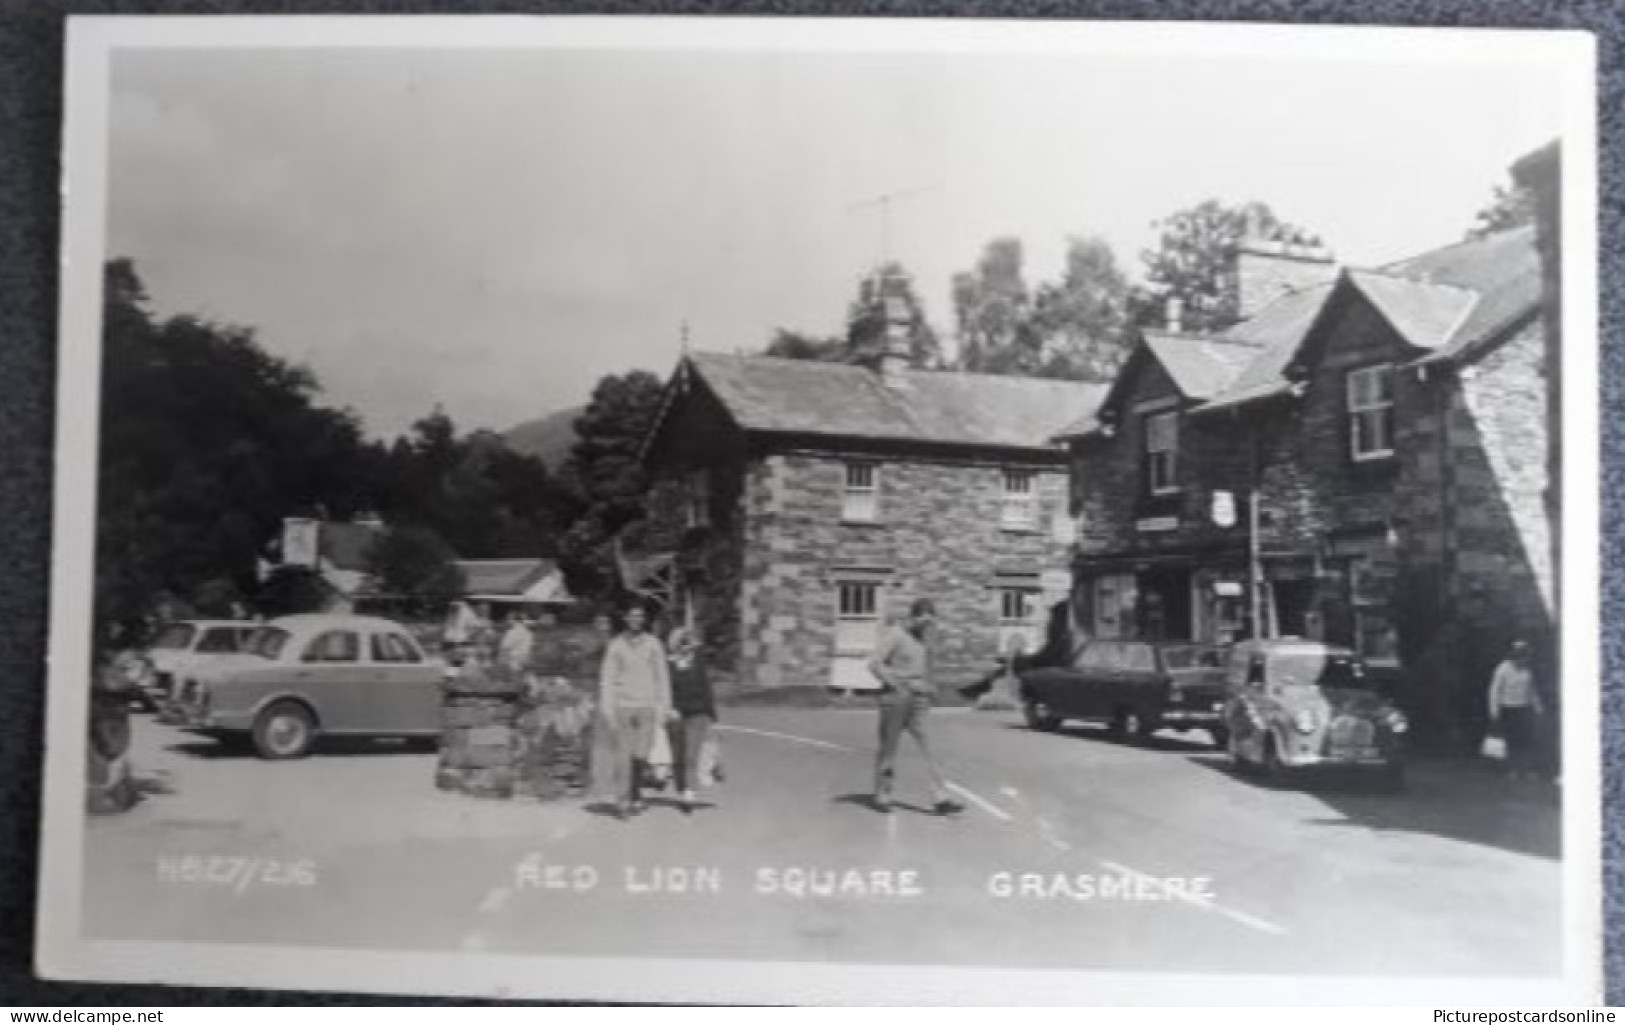 GRASMERE RED LION SQUARE OLD R/P POSTCARD CUMBRIA BY SANKEYS OF BARROW IN FURNESS - Grasmere